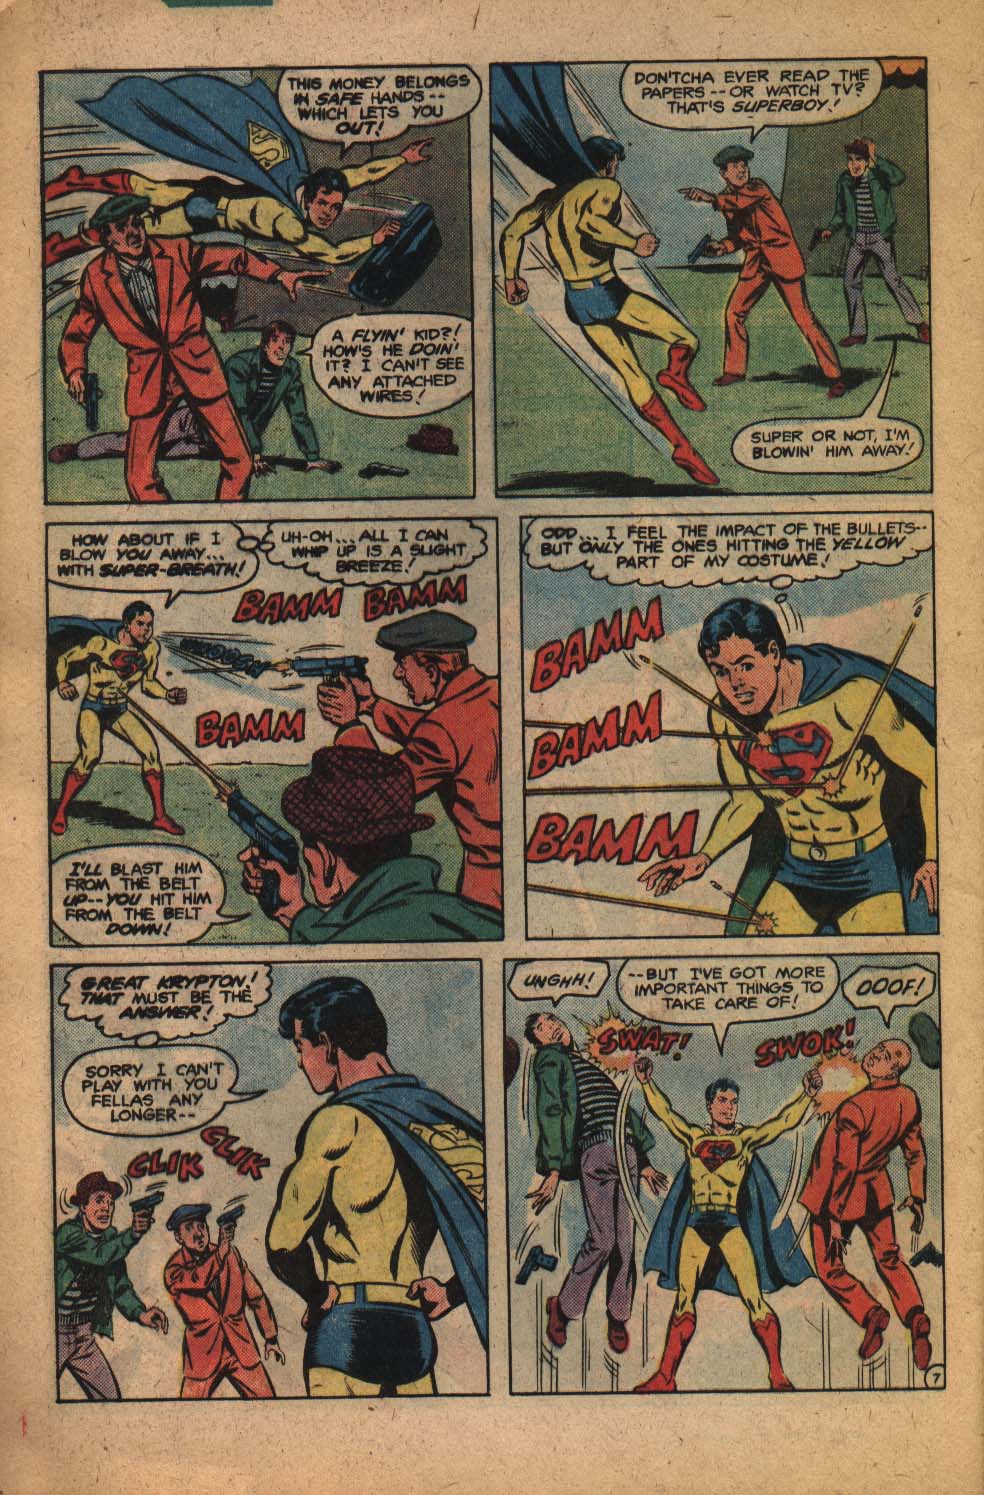 The New Adventures of Superboy 18 Page 31